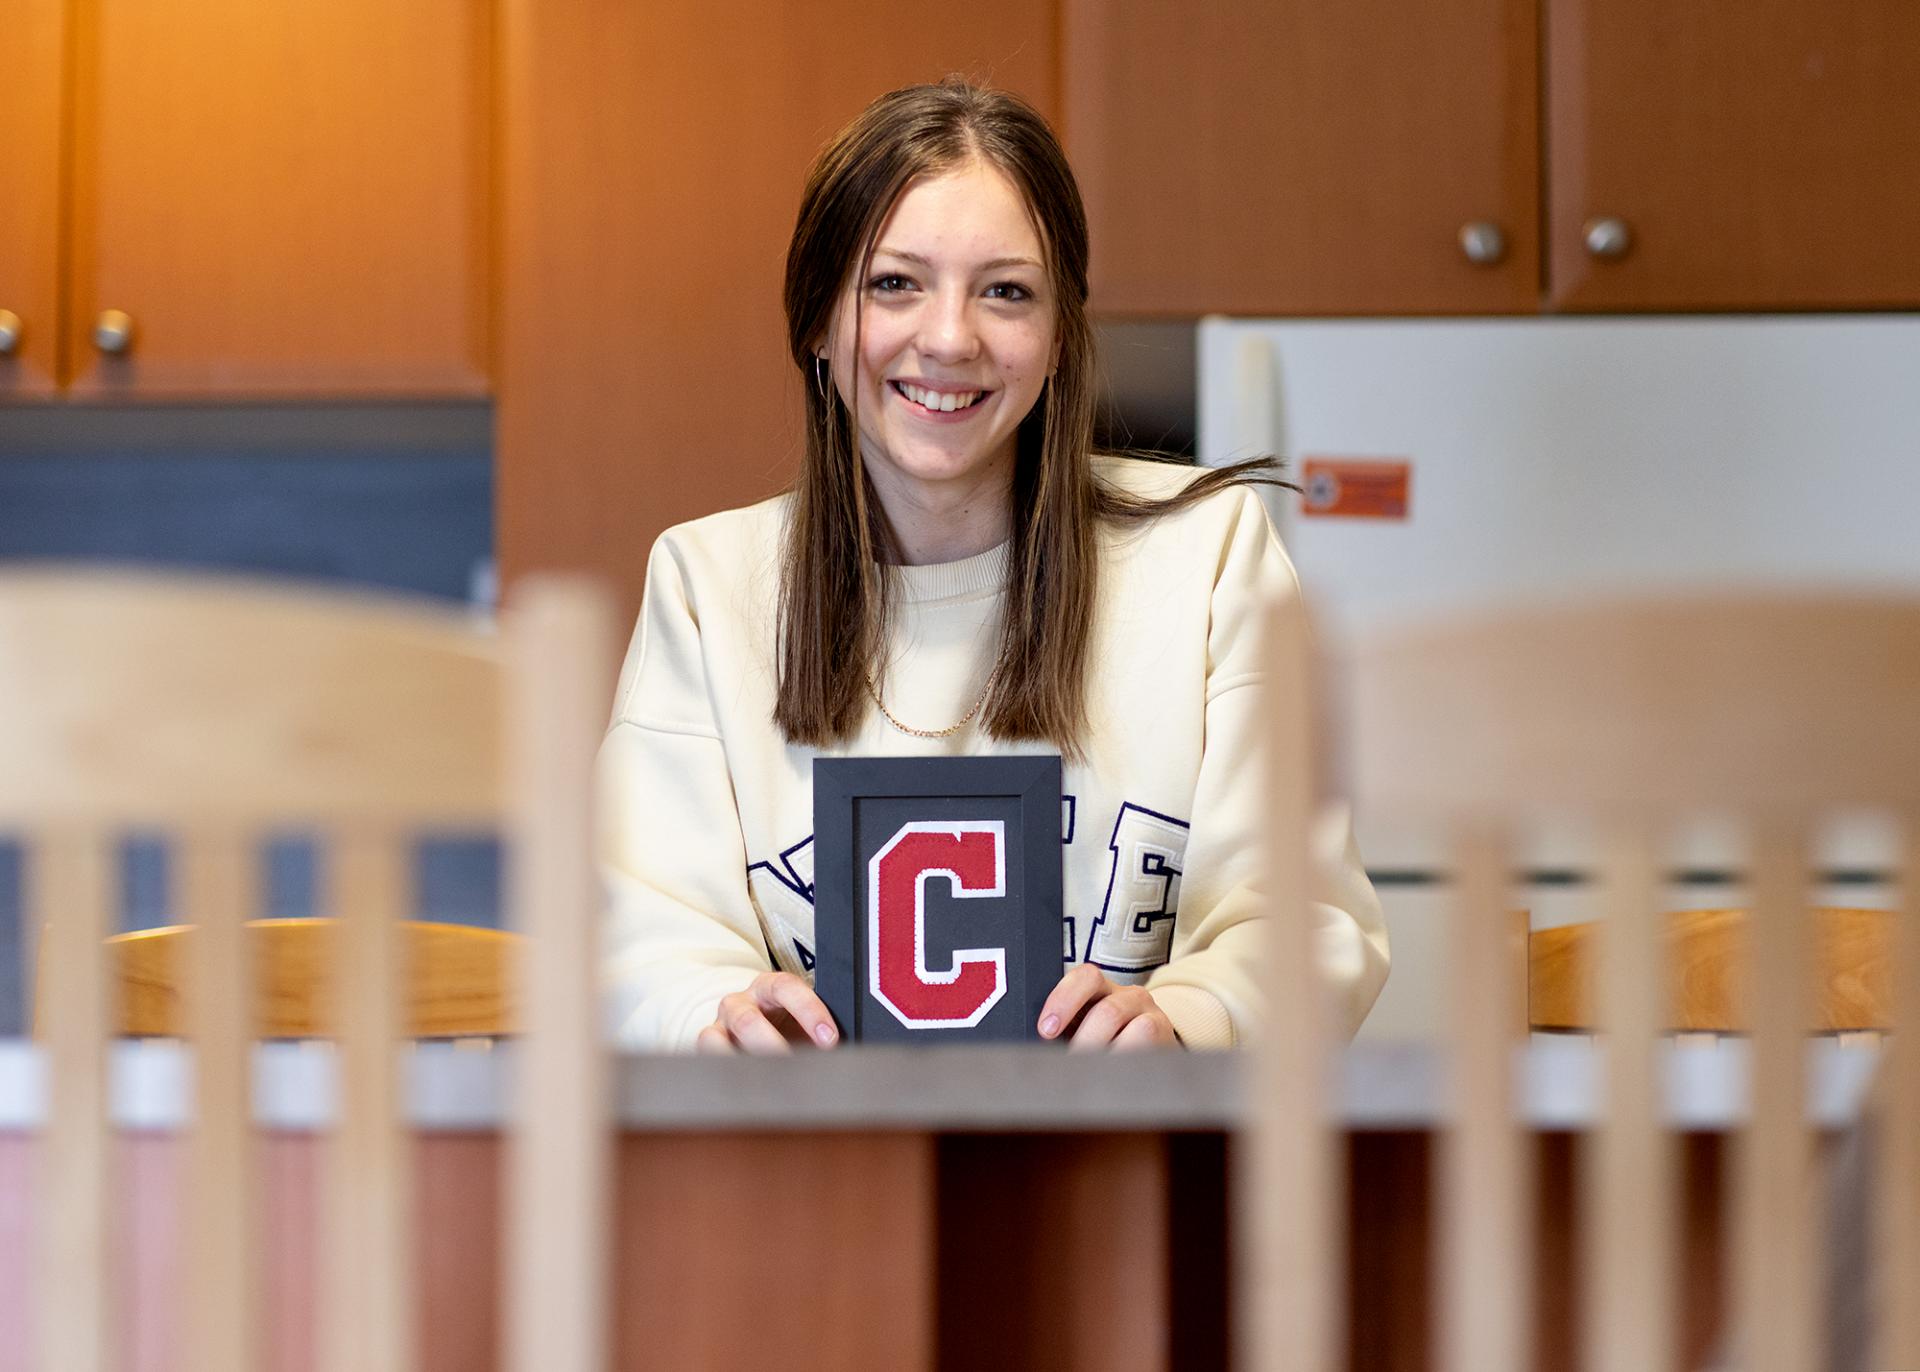 A photo of Erin Middleton with a framed C from a hockey jersey